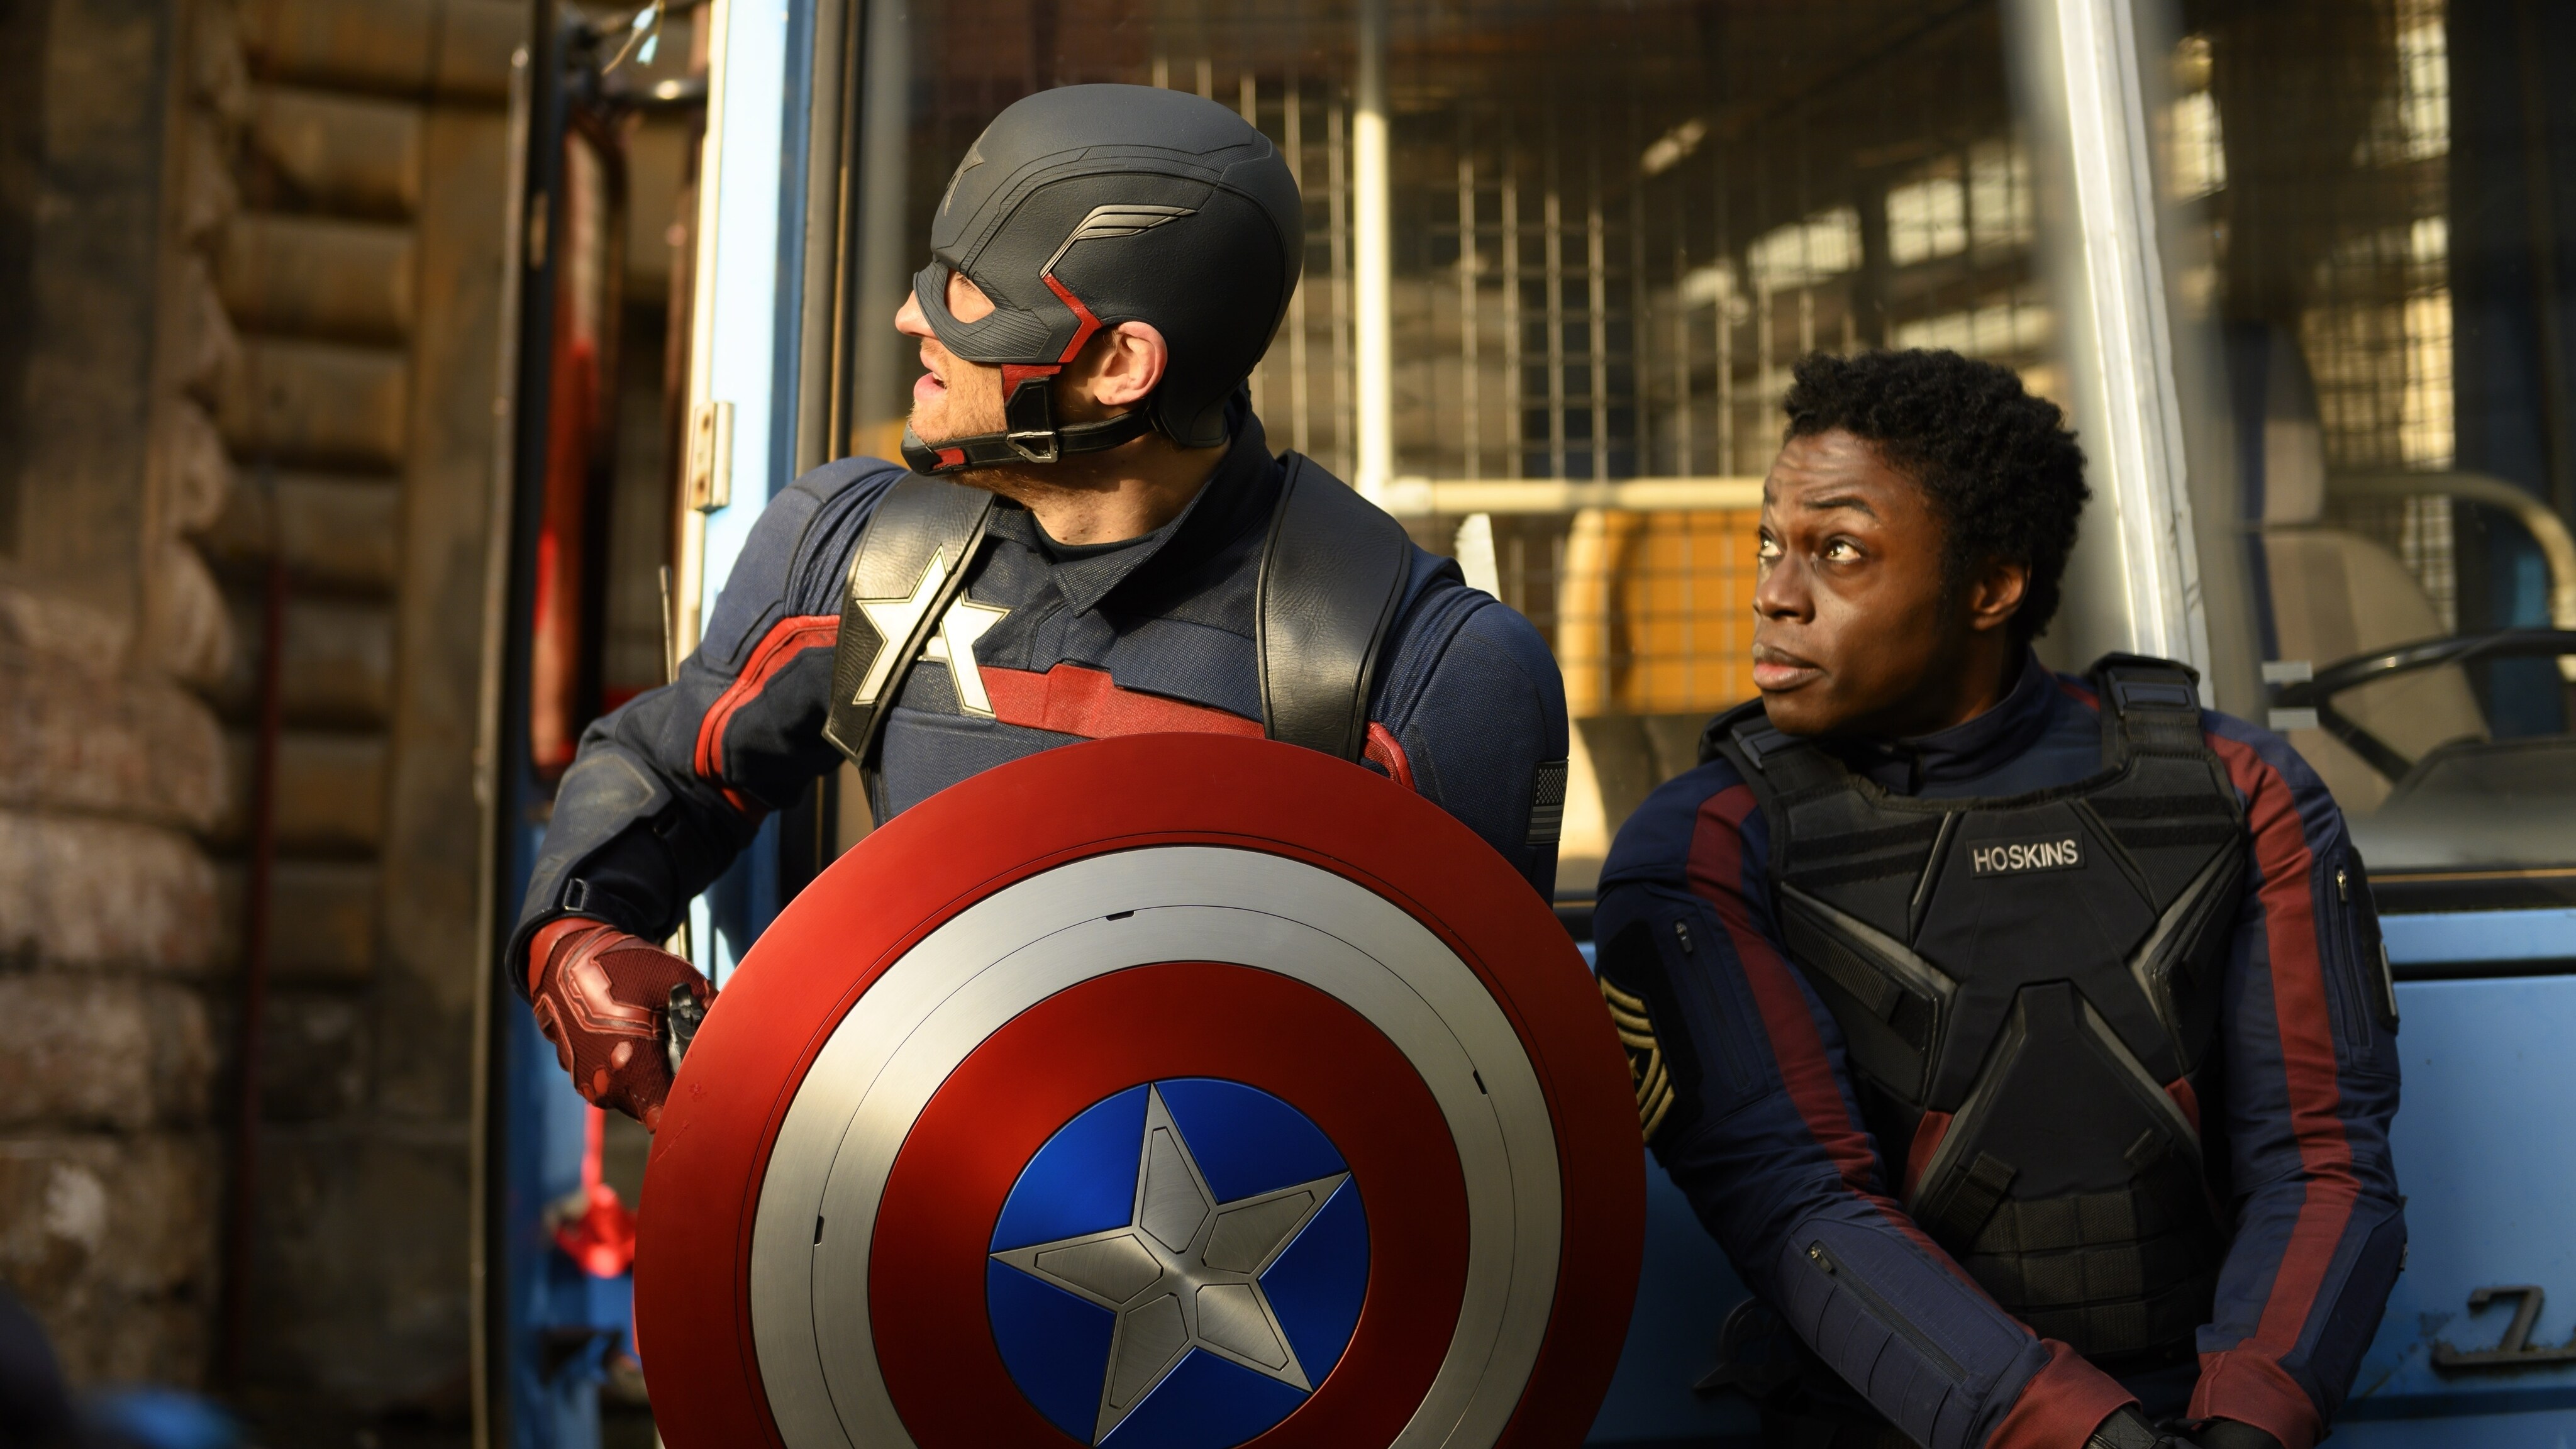 (L-R): John Walker (Wyatt Russell) and Lemar Hoskins (Clé Bennett) in Marvel Studios' THE FALCON AND THE WINTER SOLDIER exclusively on Disney+. Photo by Julie Vrabelová. ©Marvel Studios 2021. All Rights Reserved. 